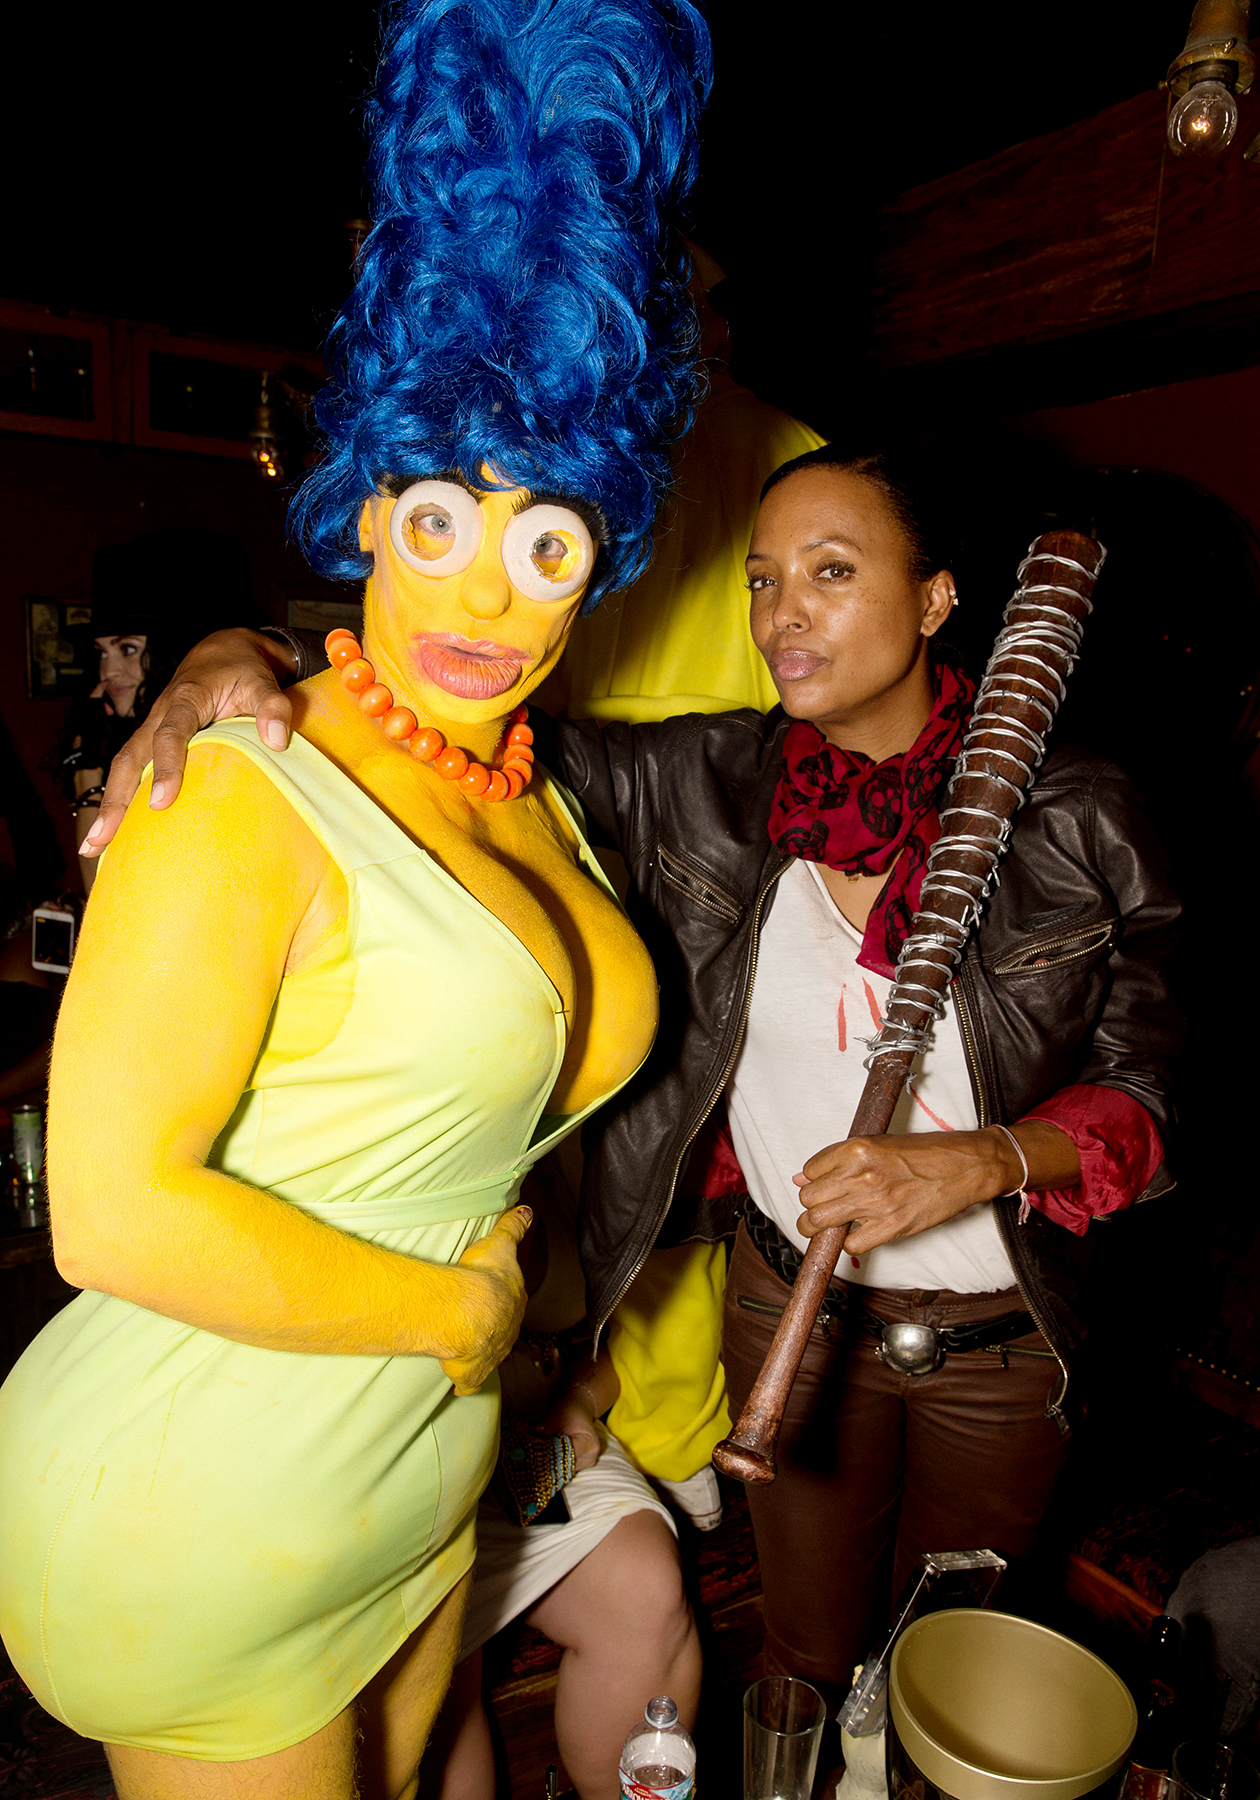 How Colton Haynes Transformed Into Marge Simpson for Halloween